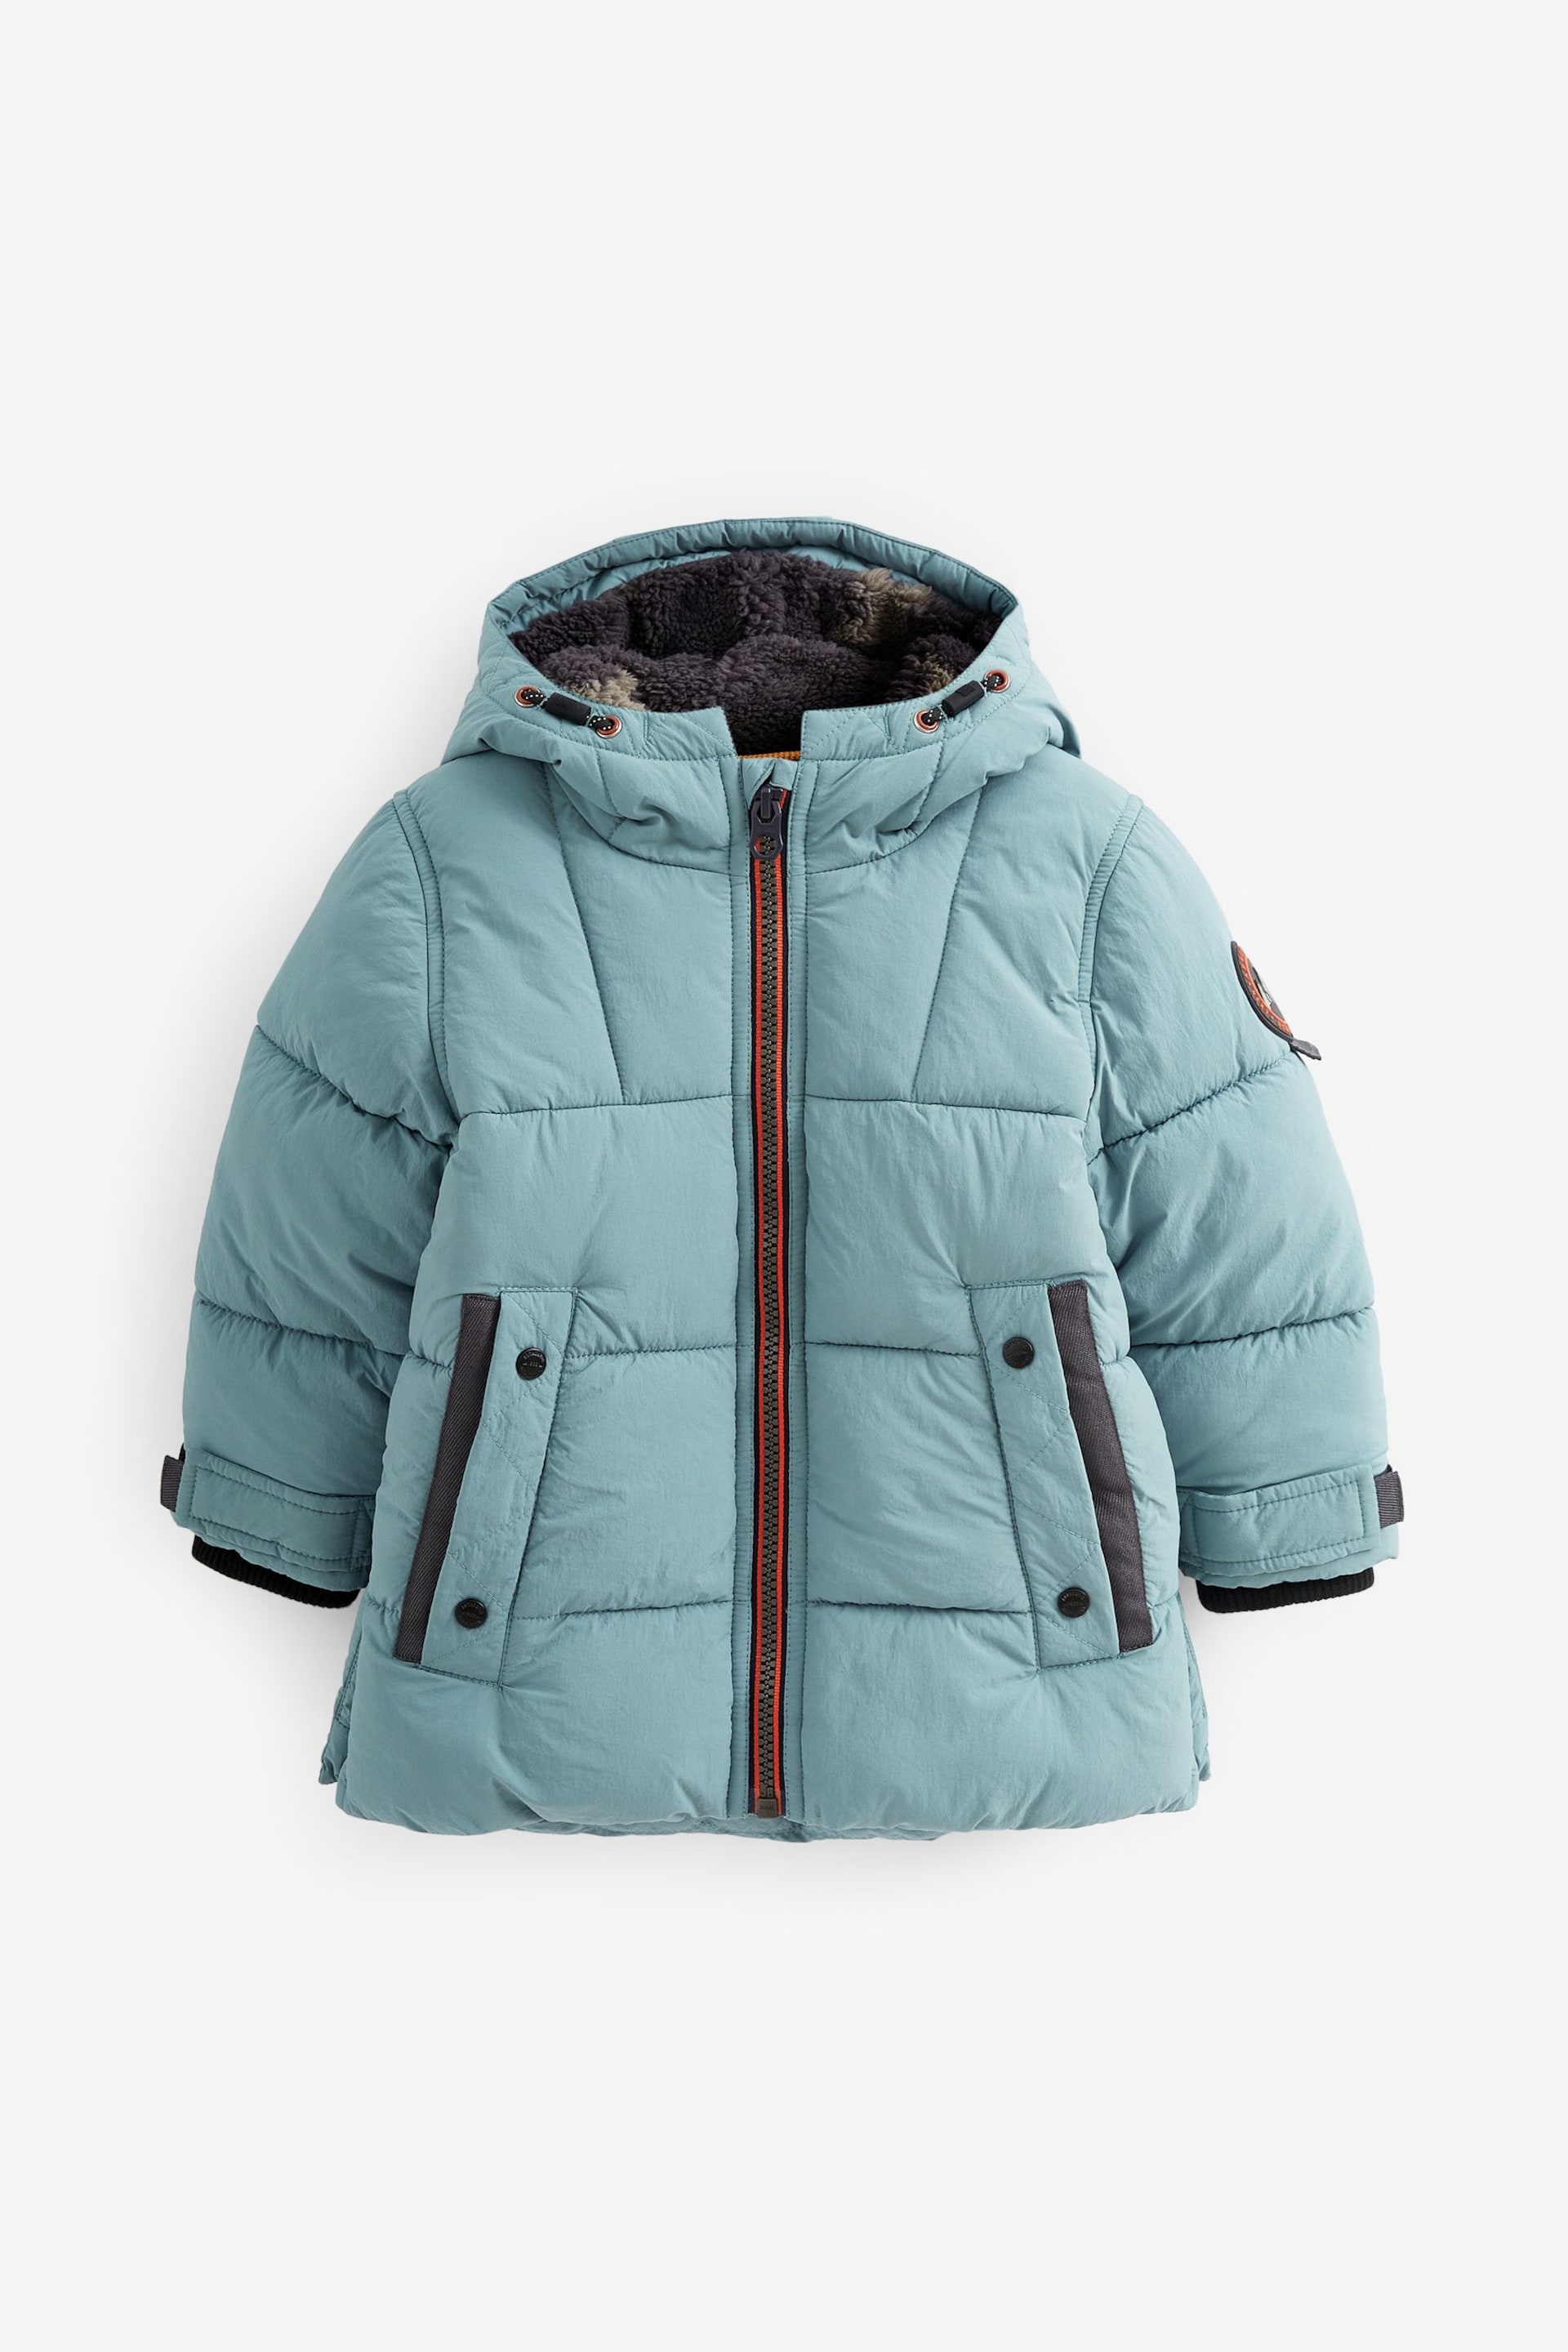 Mineral Blue Borg Teddy Lined Padded Coat (3mths-7yrs) - Image 4 of 8